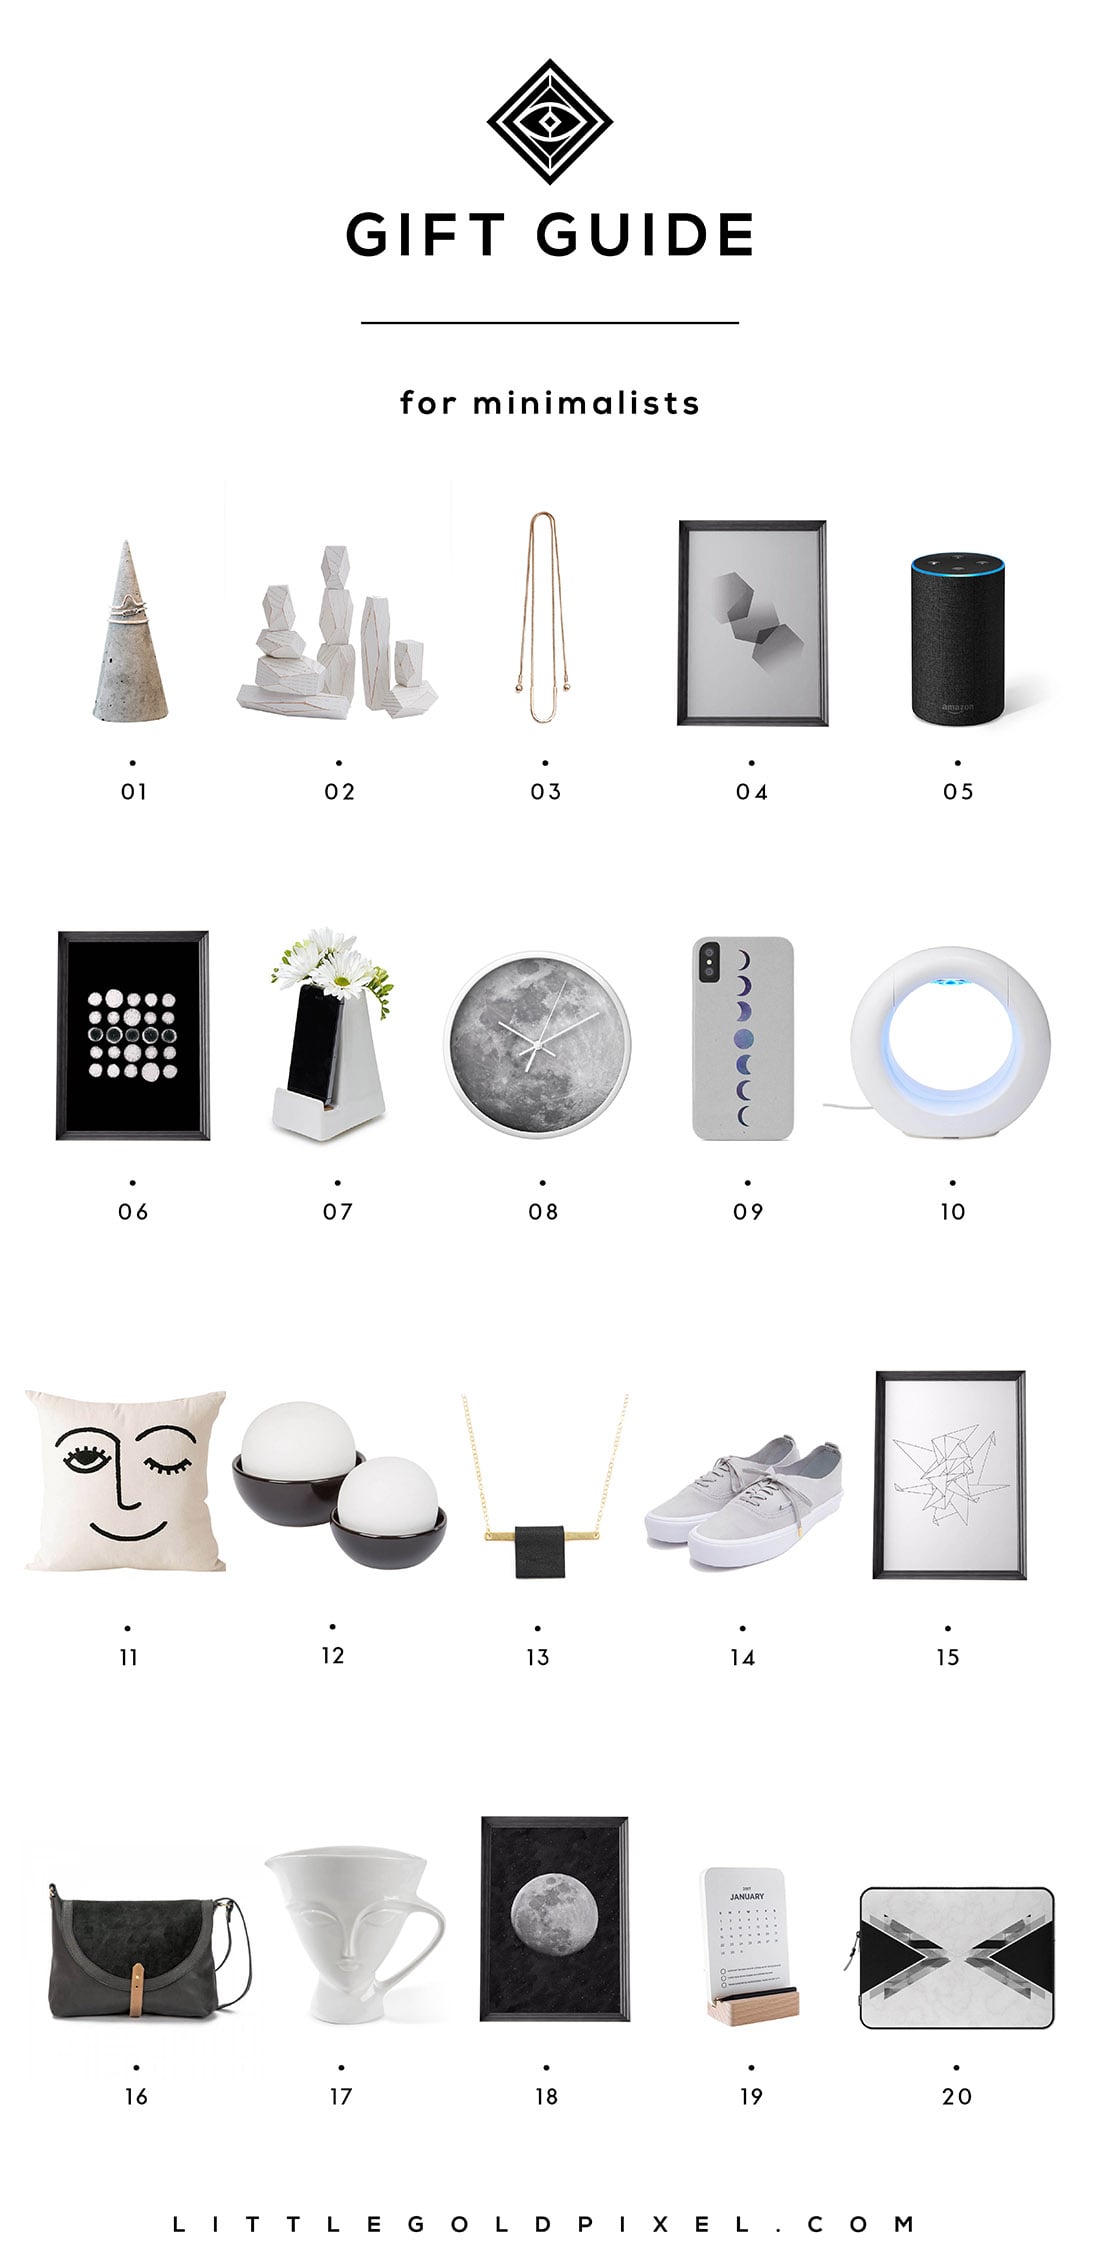 Little Gold Pixel's Minimalist Gift Guide: Here are 20 gifts perfect for those who appreciate clean lines and good design. Grab one for yourself while you're at it!